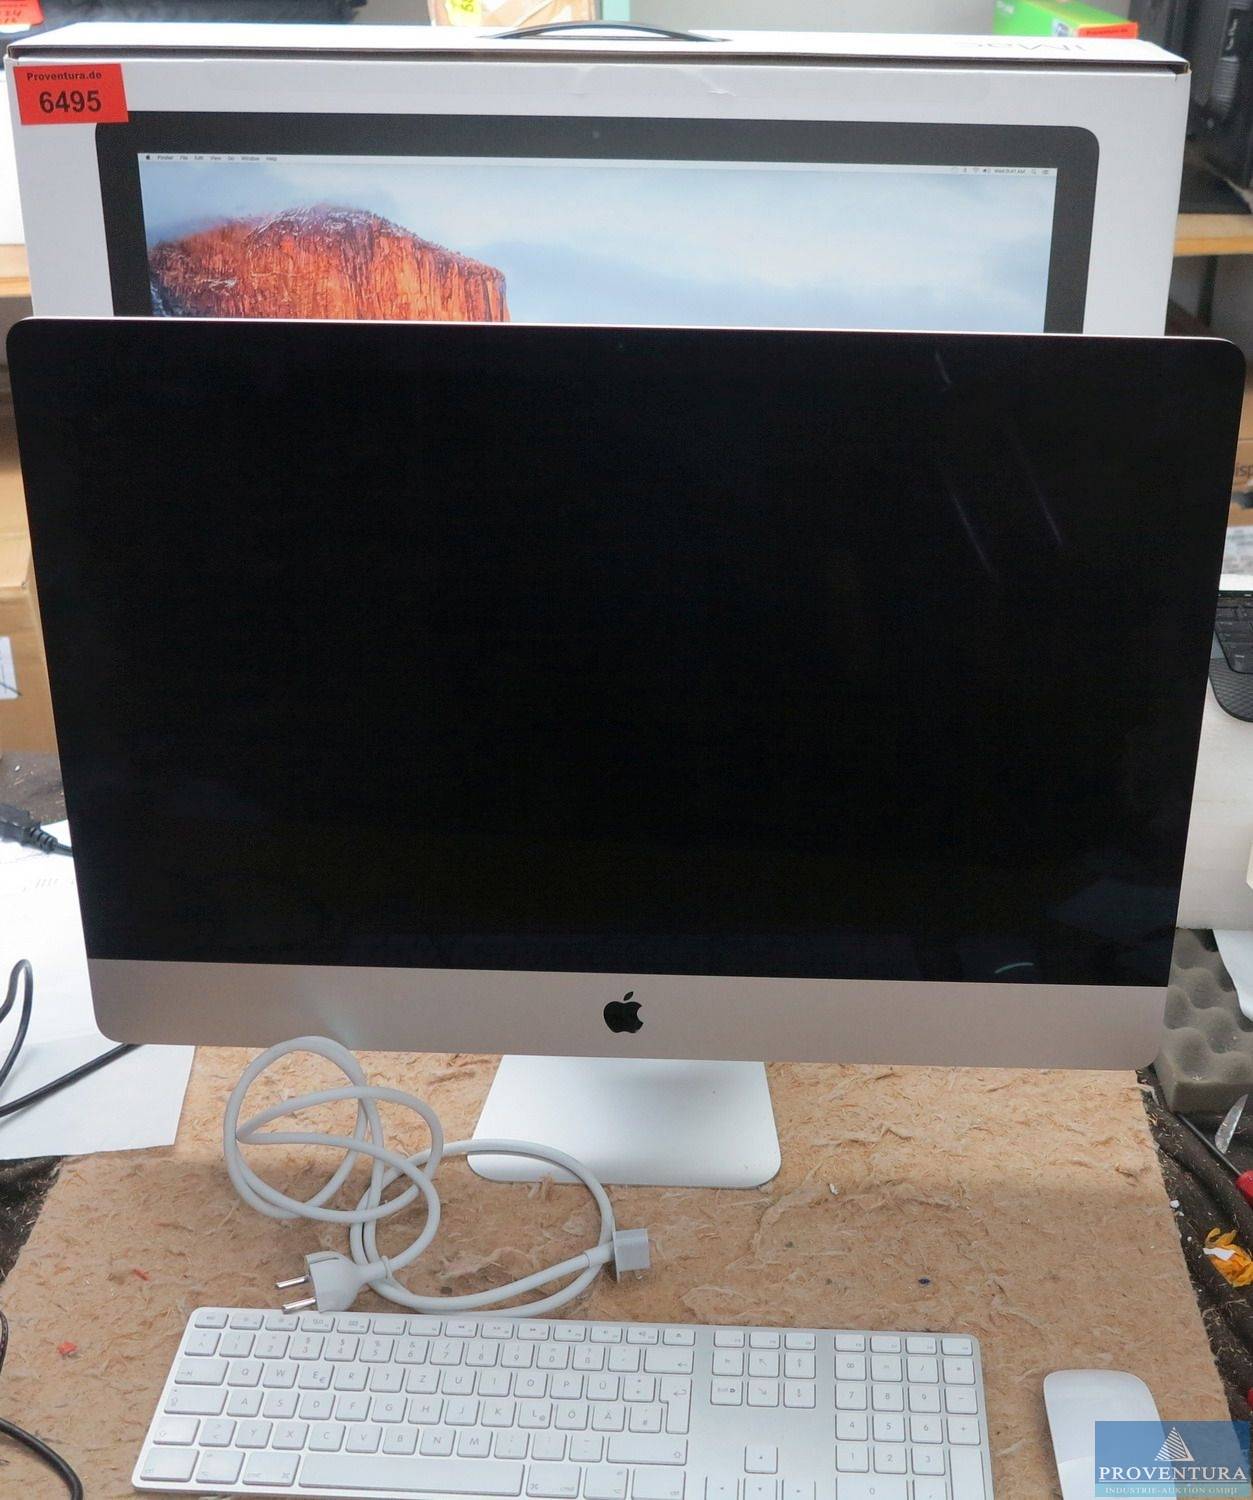 All In One Pc Apple Imac 27 Zoll Proventura Online Auktion